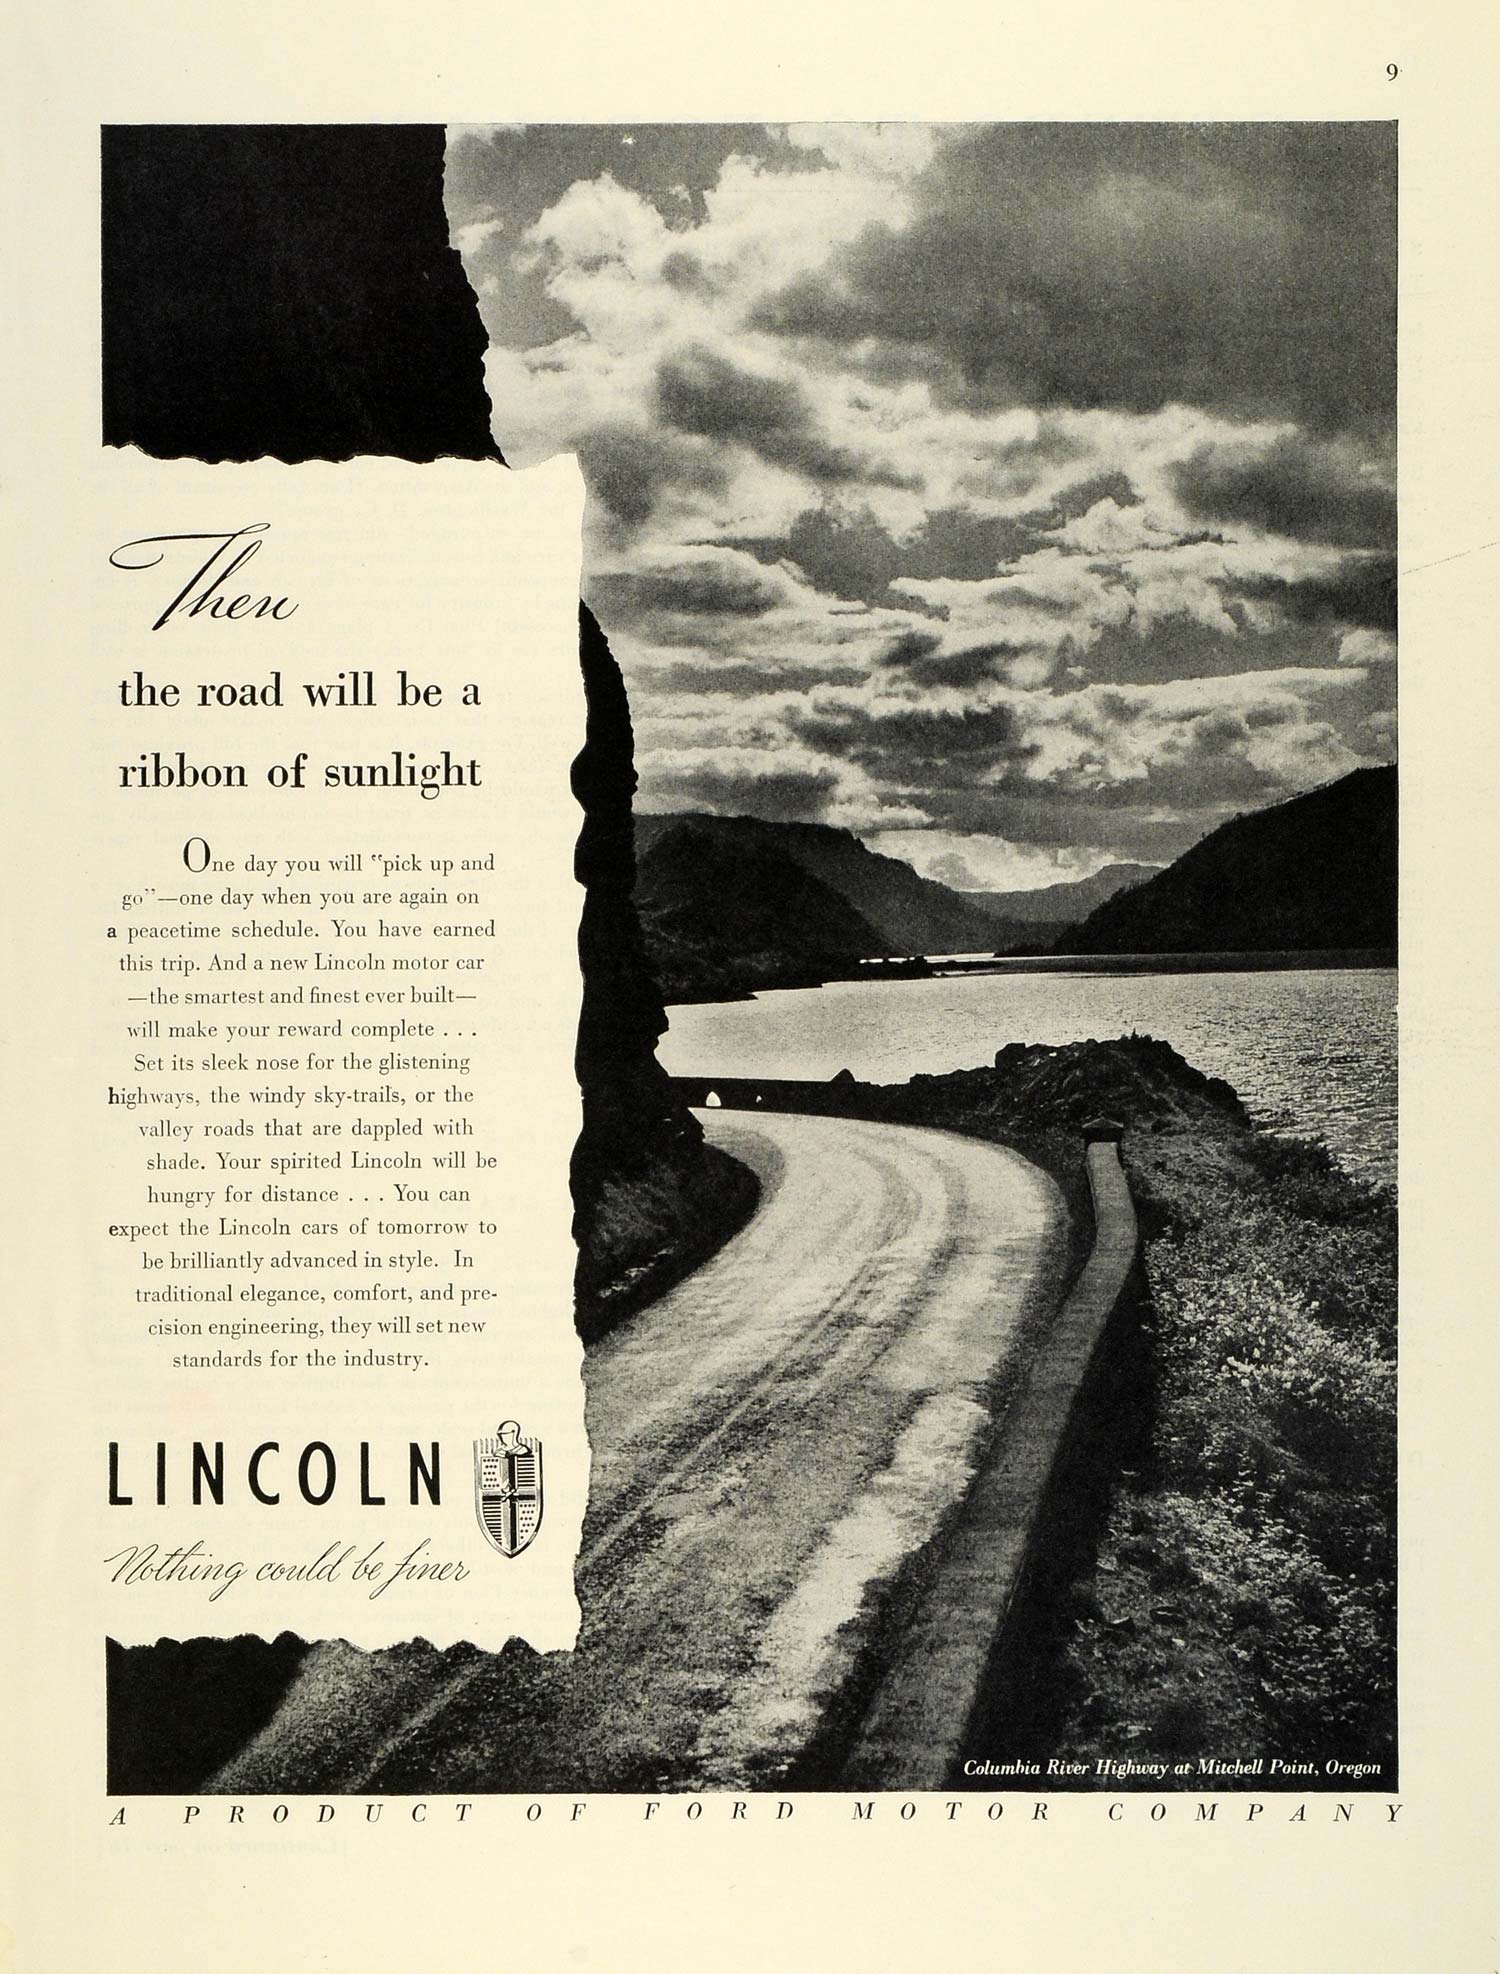 1945 Ad Lincoln Automobiles Columbia River Highway Mitchell Point Oregon FZ8